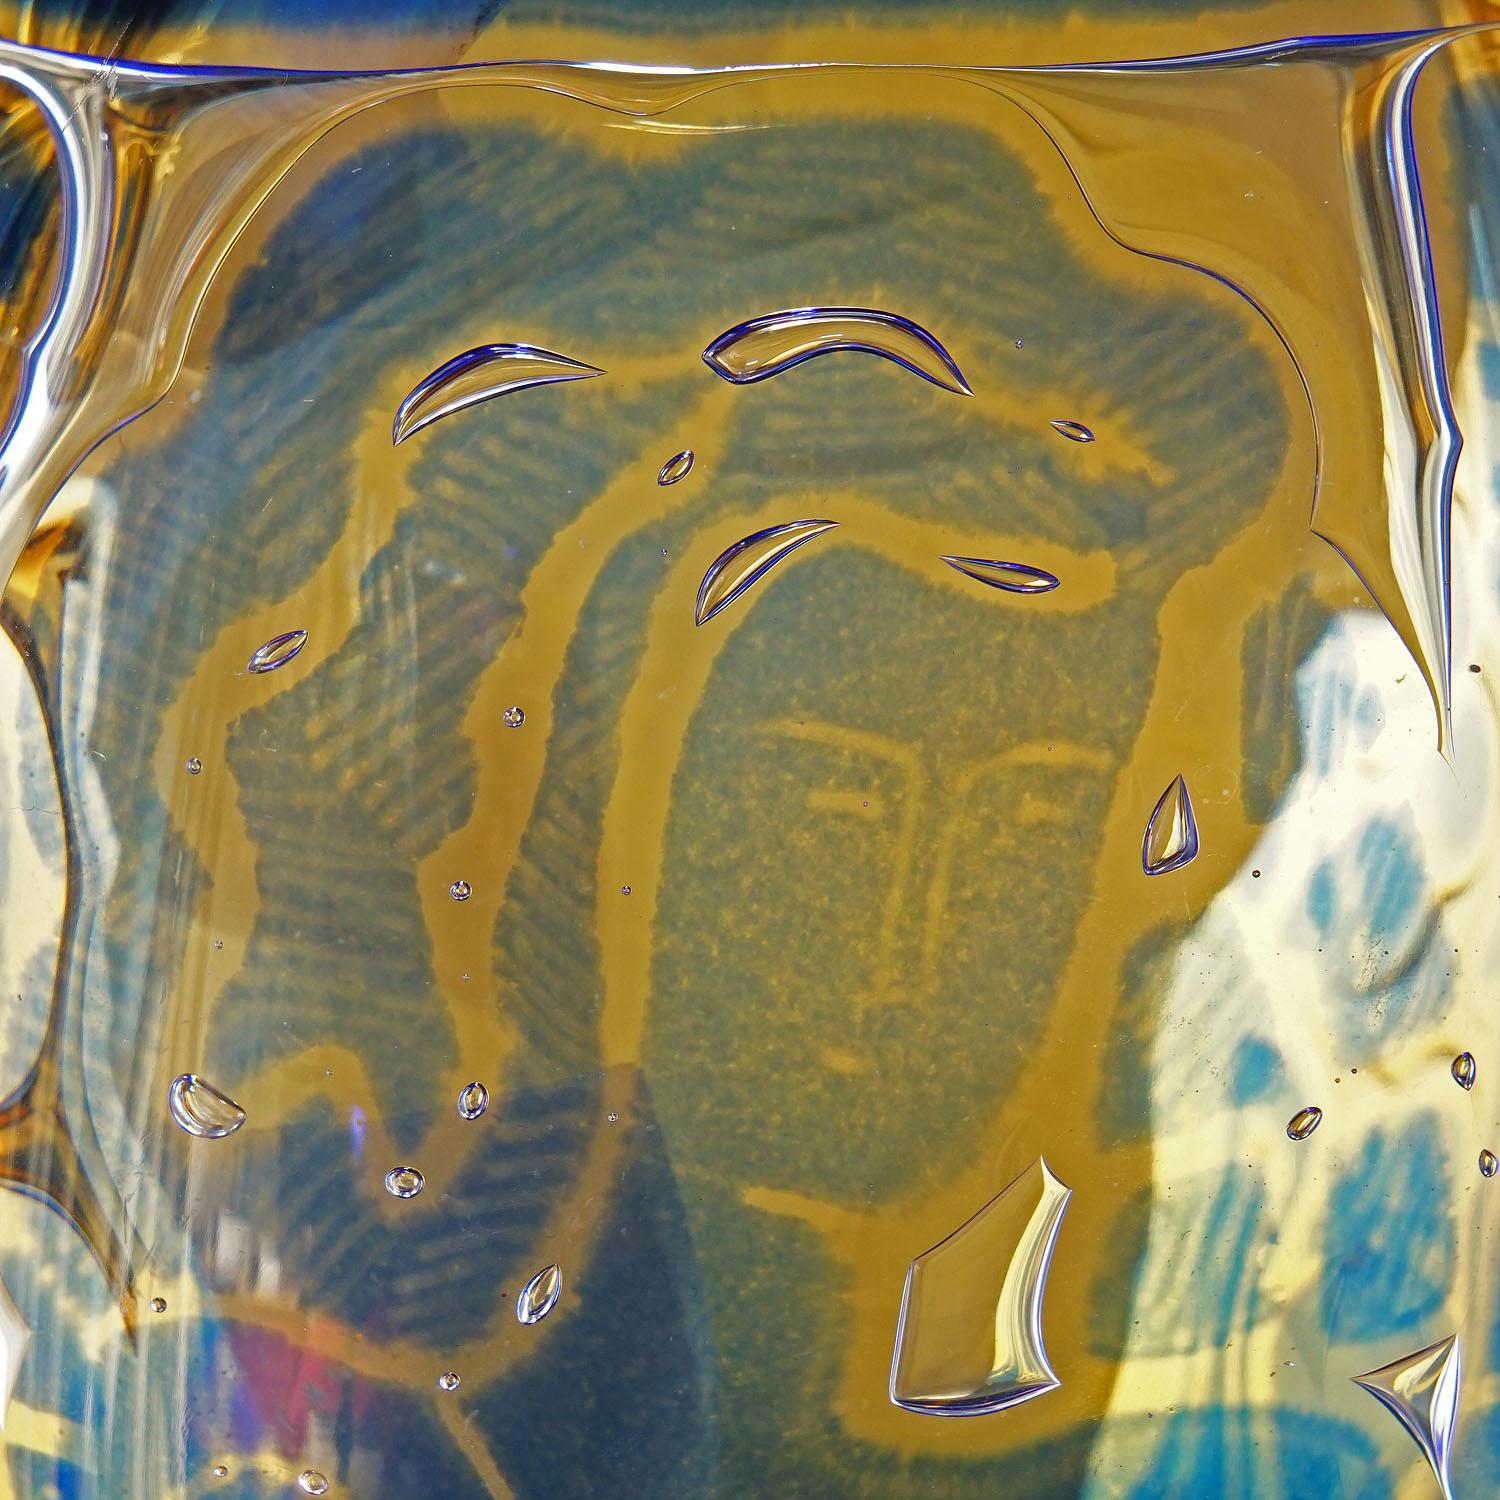 20th Century Ariel 'Gondoliere' Vase by Edvin Oehrstroem for Orrefors, Sweden, 1962 For Sale